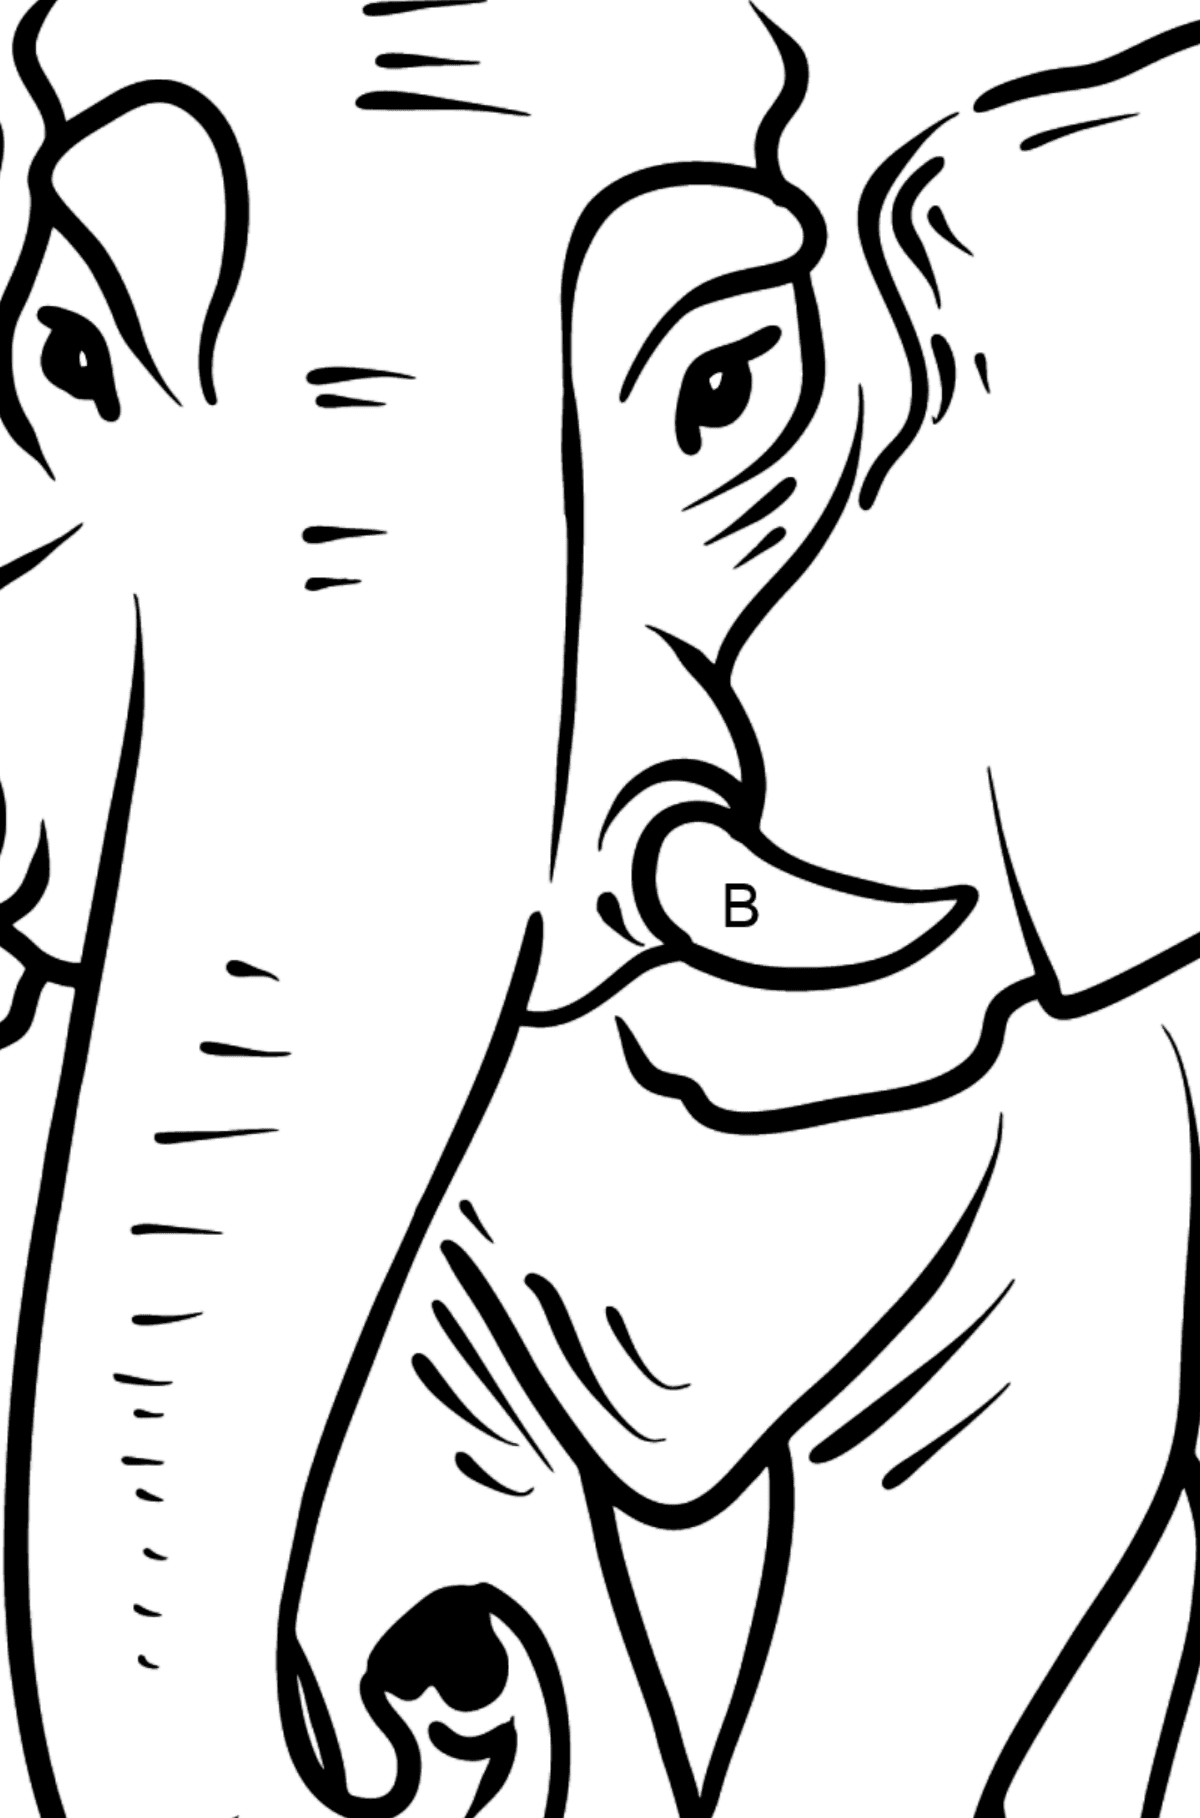 Elephant coloring page - Coloring by Letters for Kids